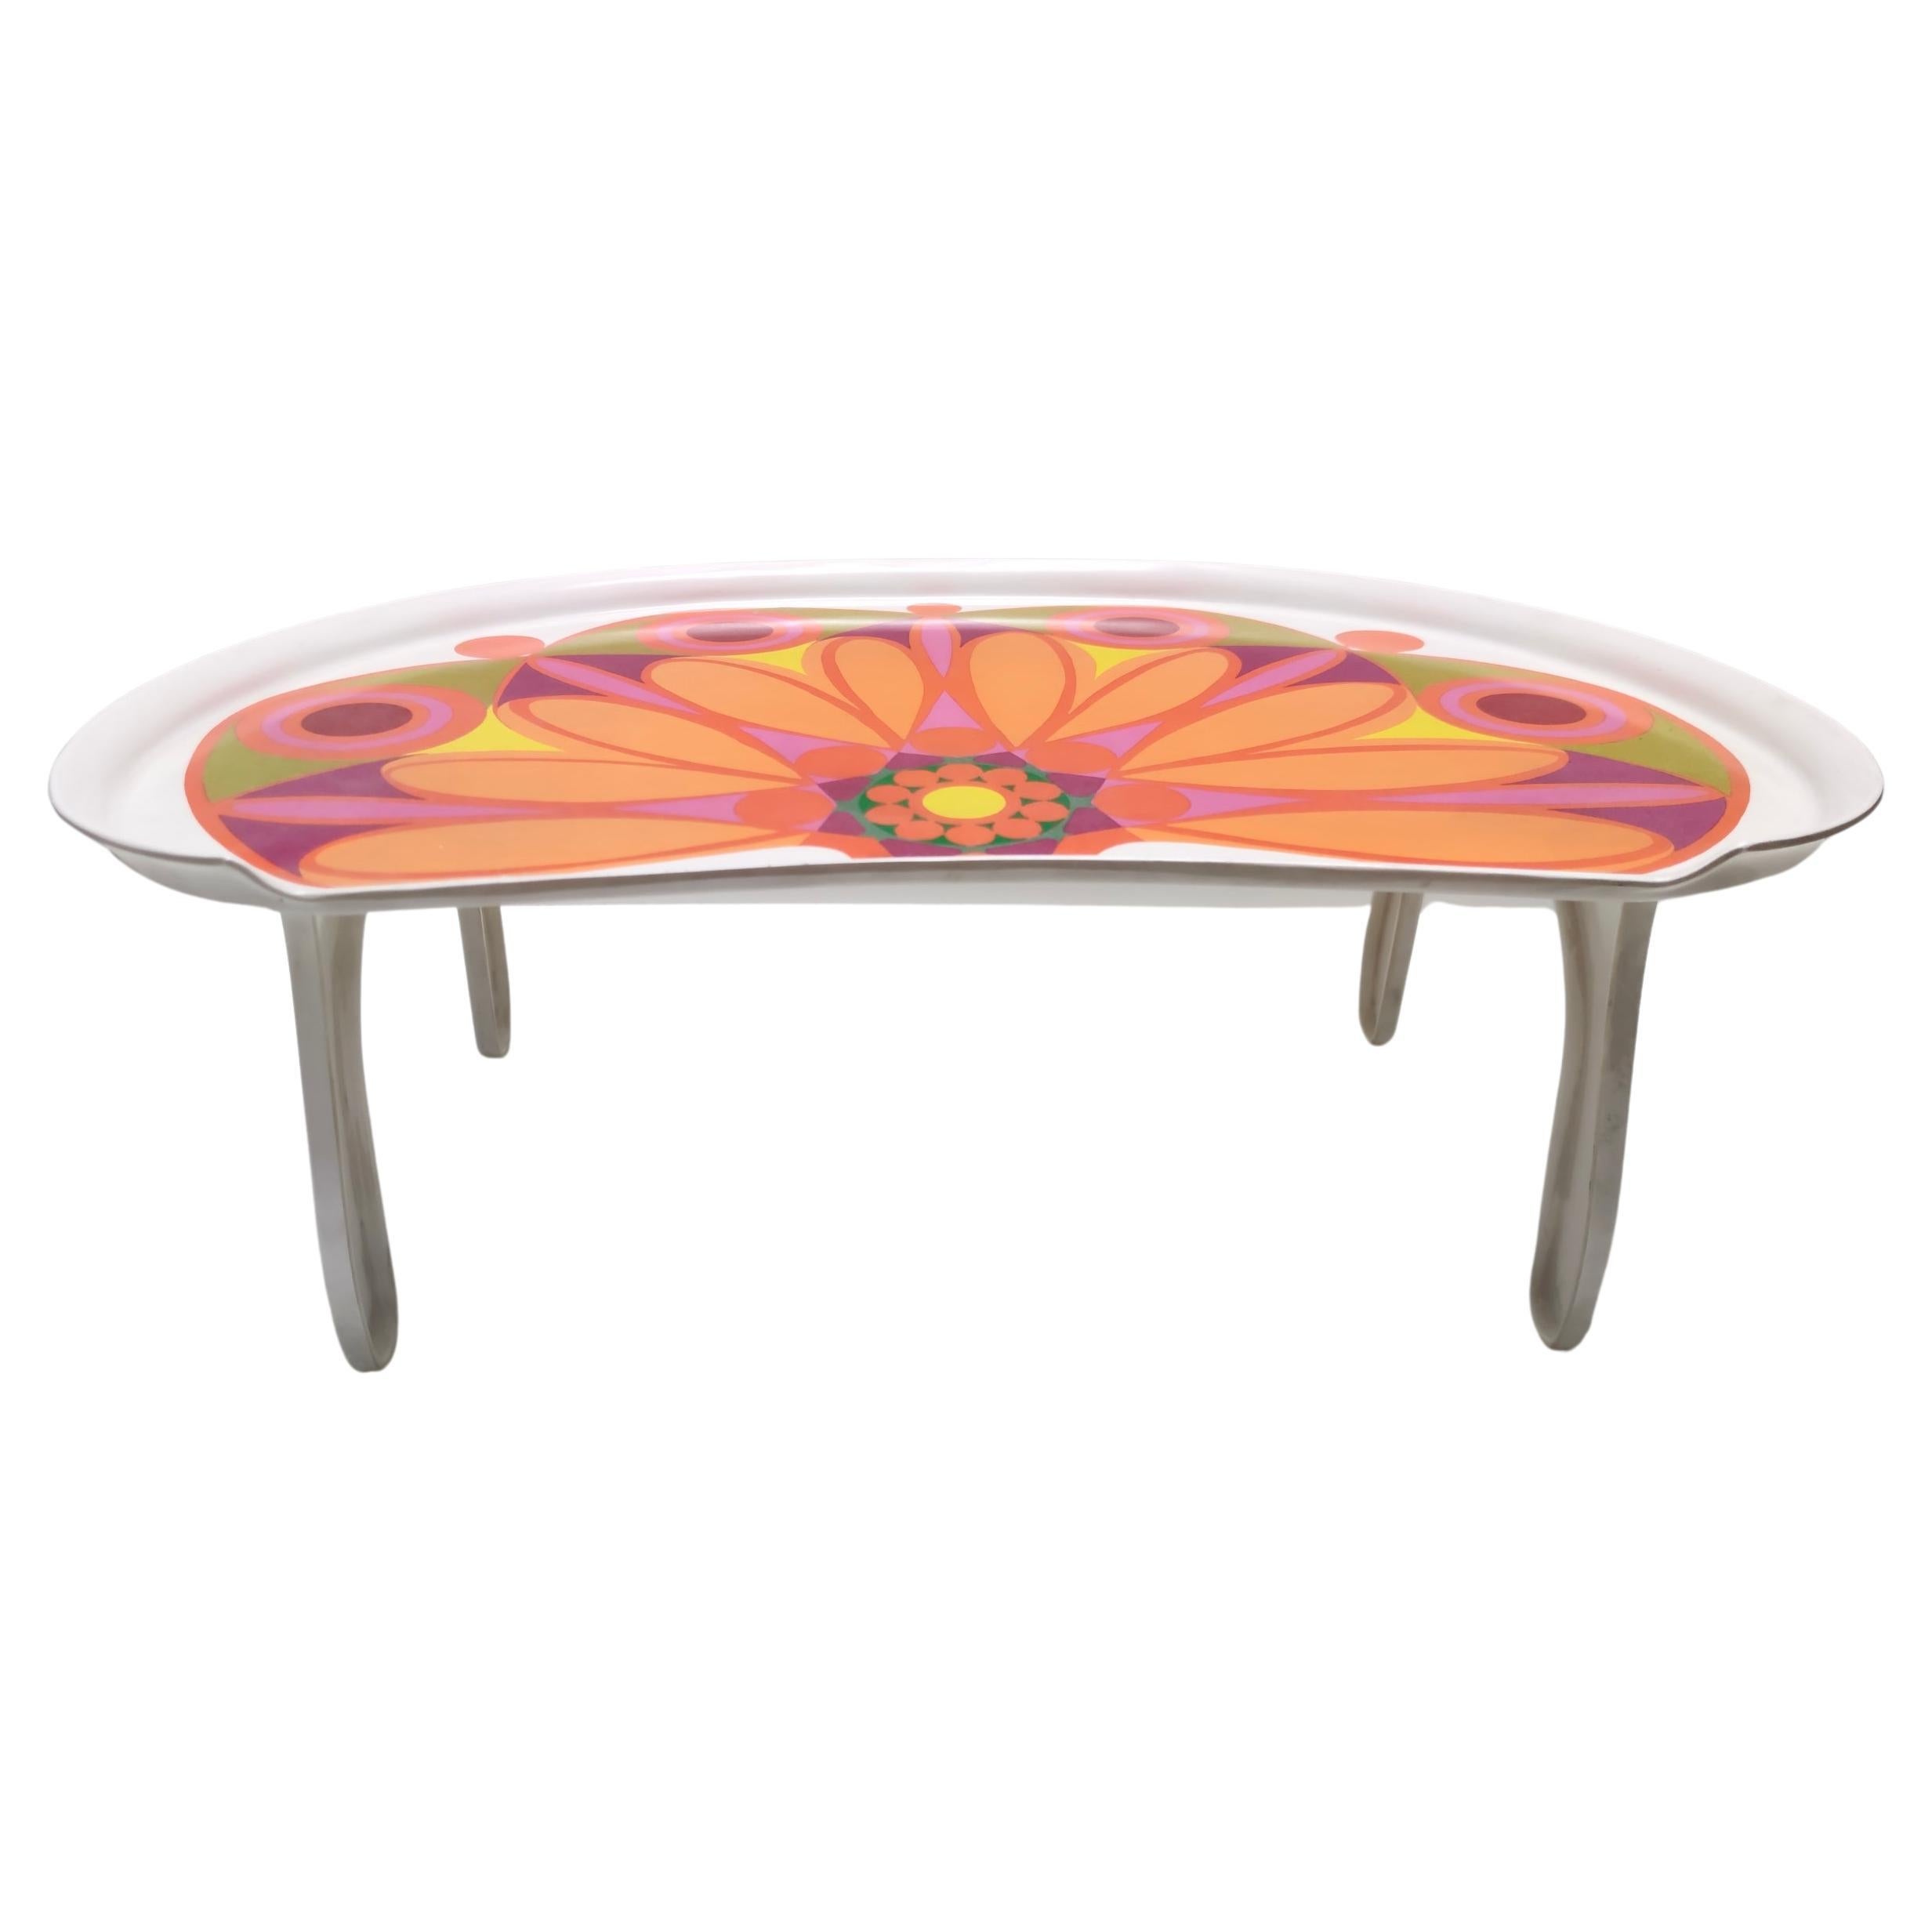 Modernist Floral Bean-Shaped Plastic Bed Tray, Italy